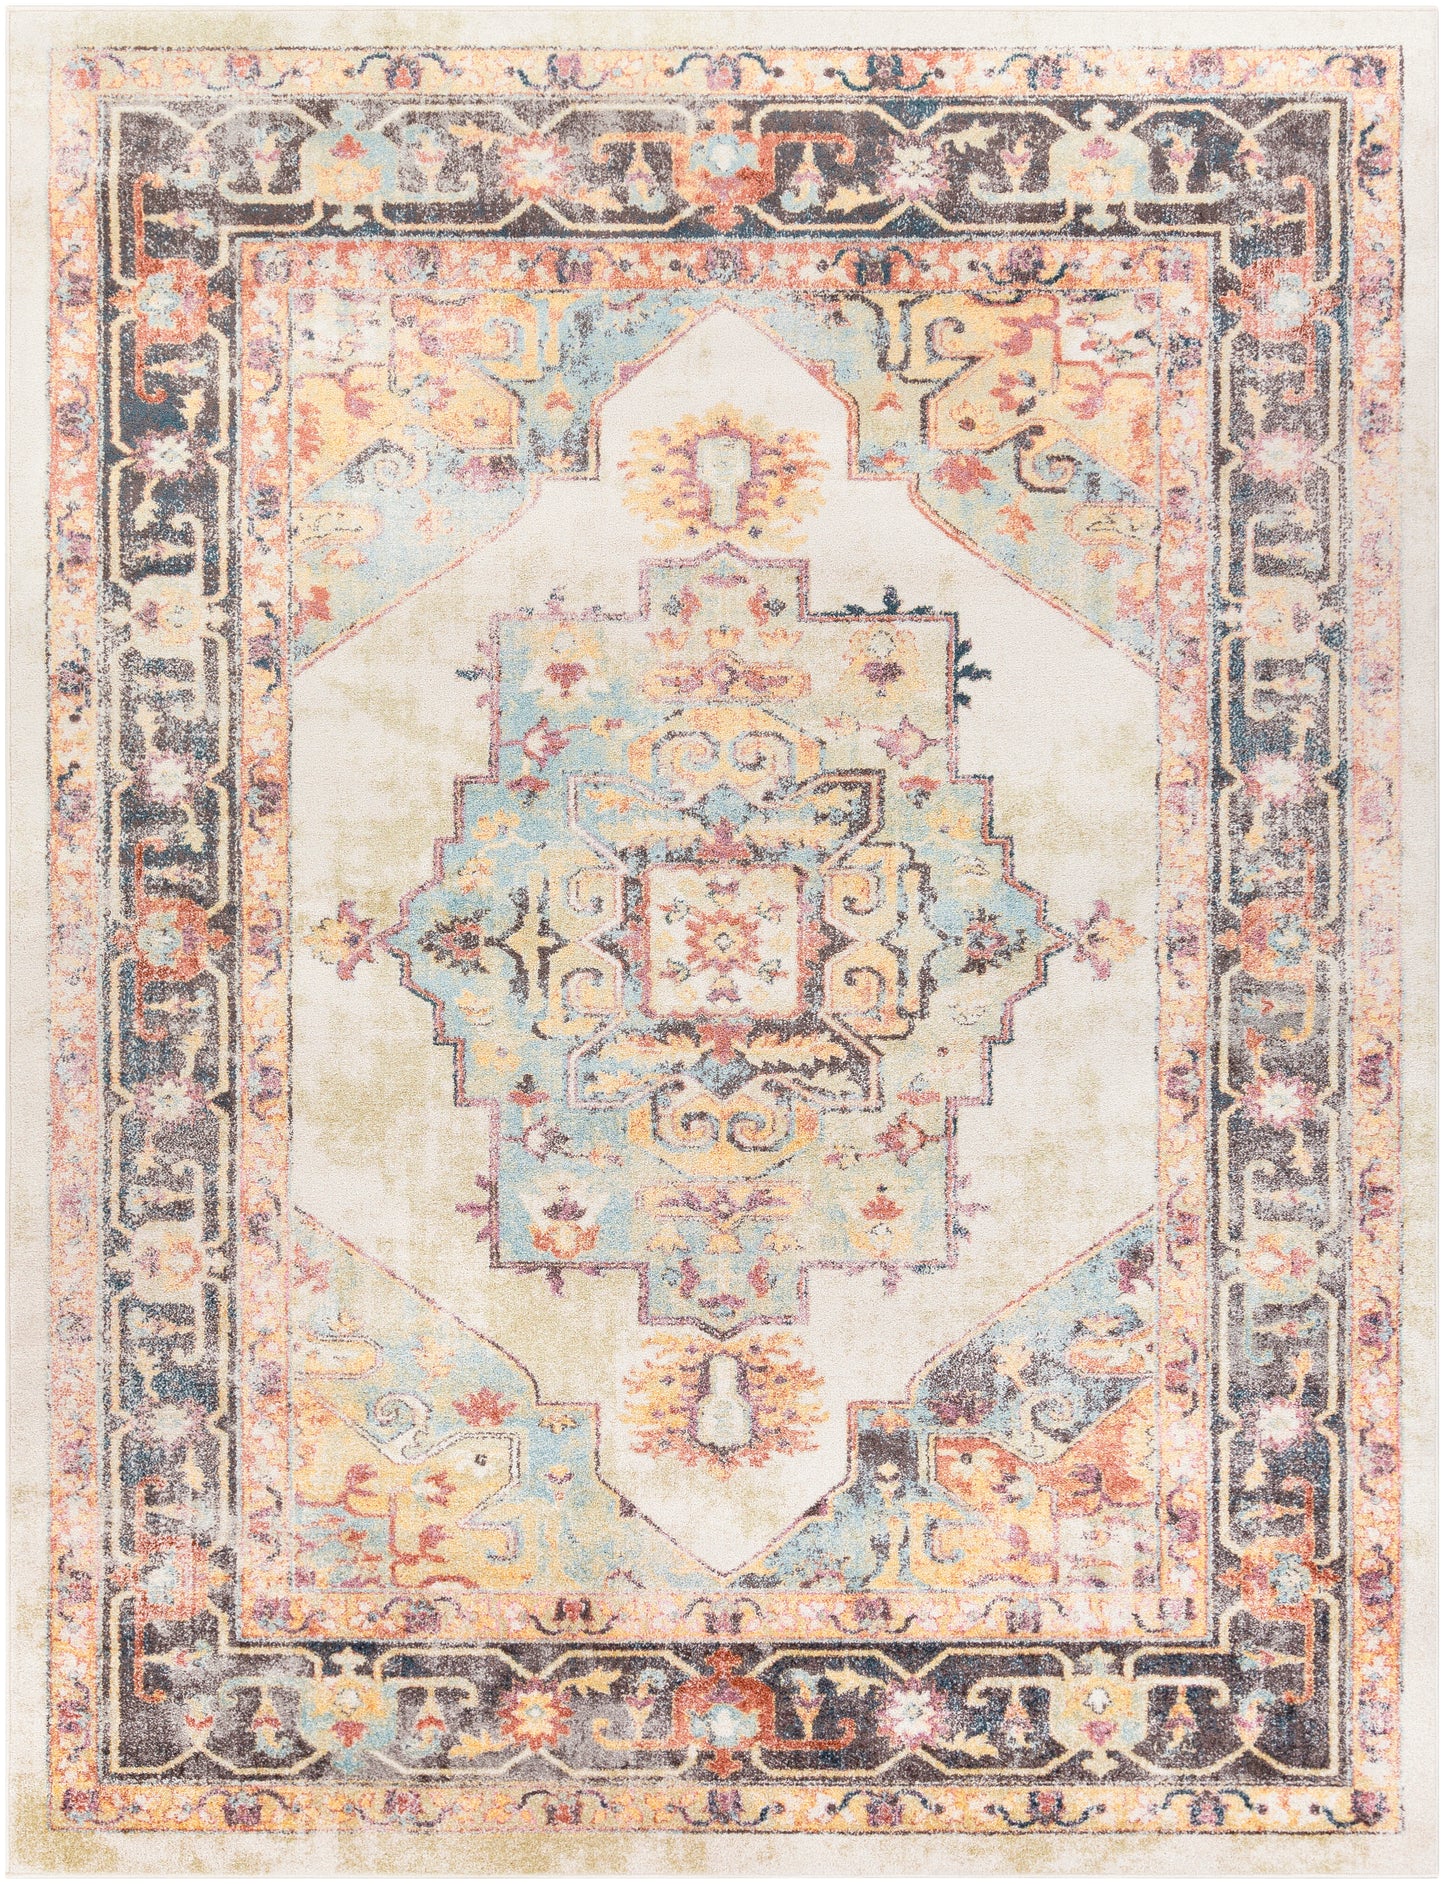 New Mexico 24878 Machine Woven Synthetic Blend Indoor Area Rug by Surya Rugs